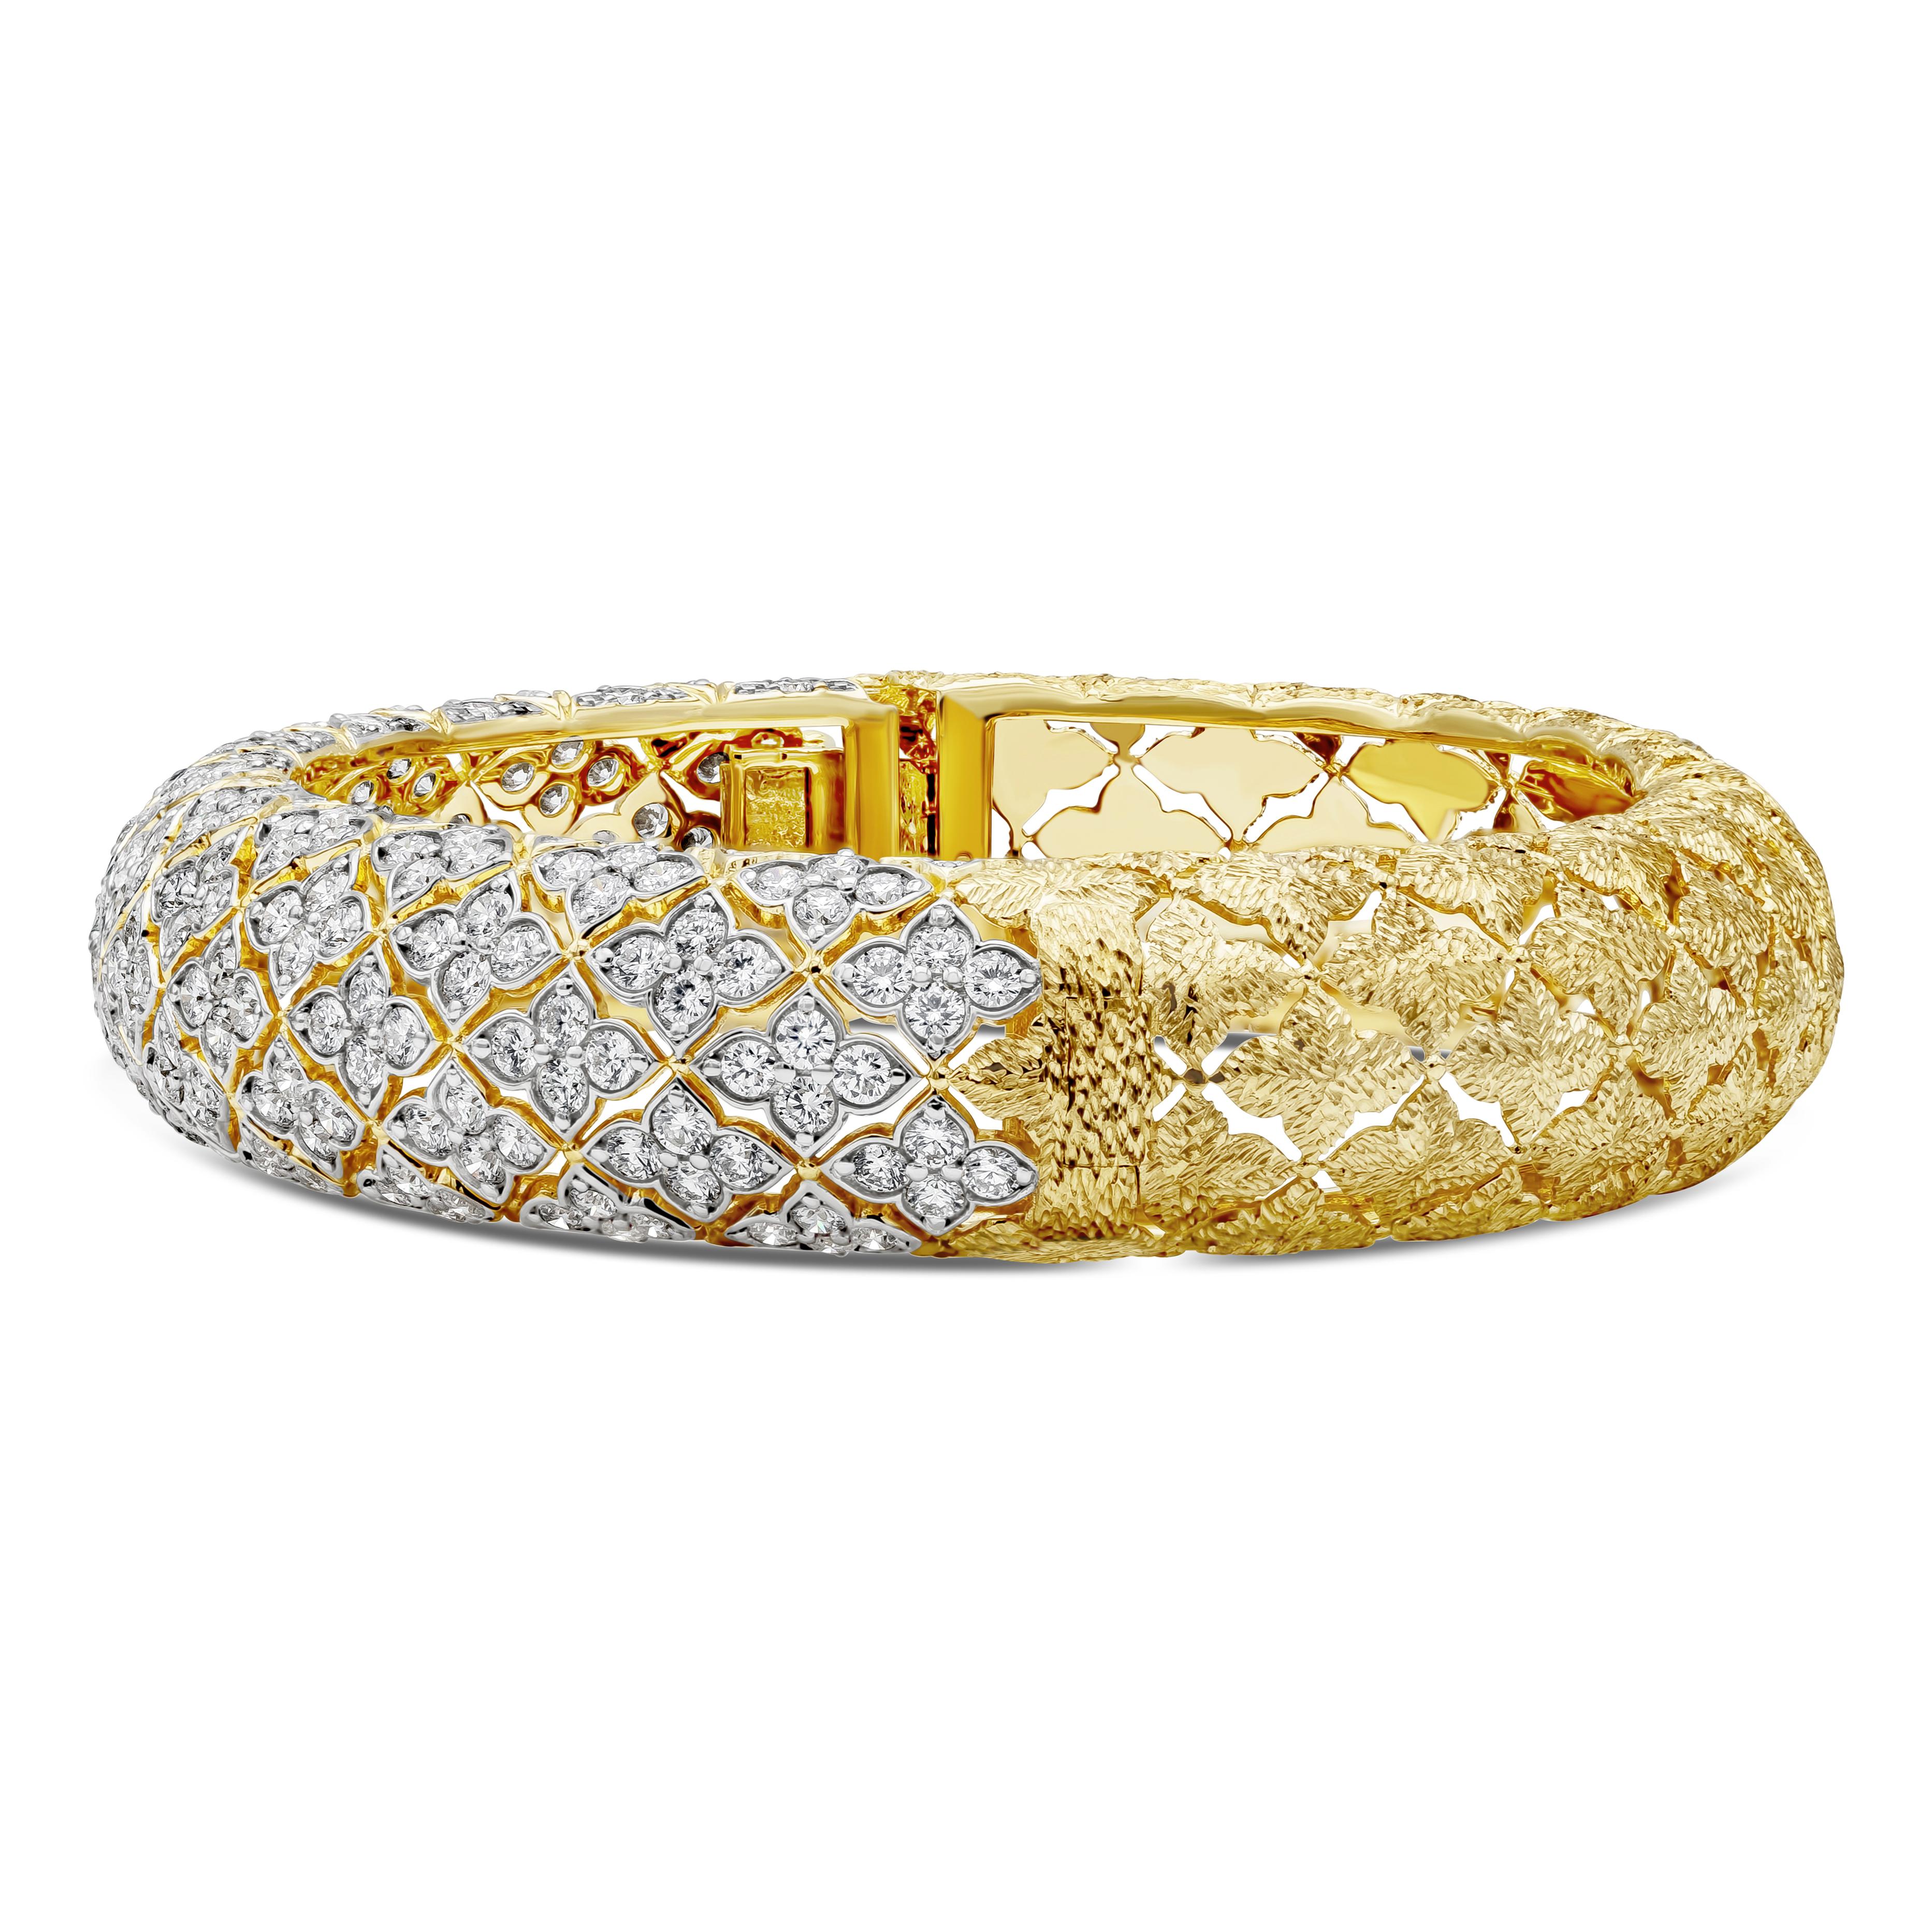 A unique and elegant bangle bracelet showcasing perfectly matched brilliant round diamonds weighing 6.64 carat total in a flower design. Diamonds are F color and VS in clarity. Beautifully set in 18K Yellow Gold. 

